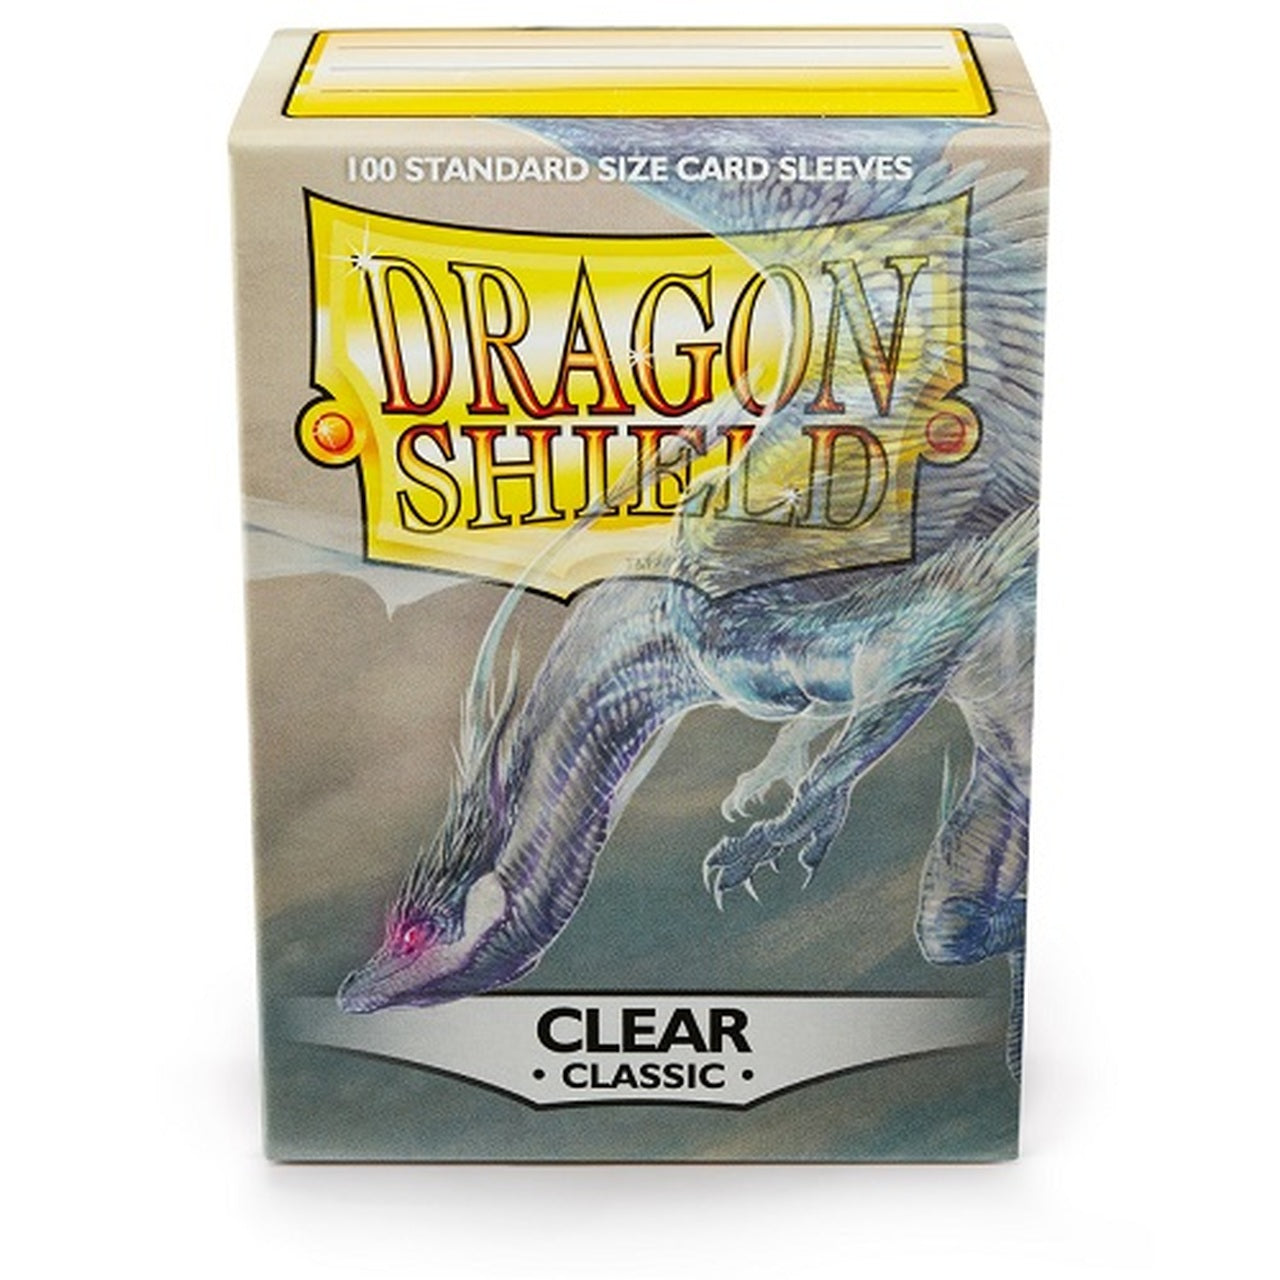 DRAGON SHIELD CLEAR STANDARD SIZE CARD SLEEVES (100) | Tacoma Games